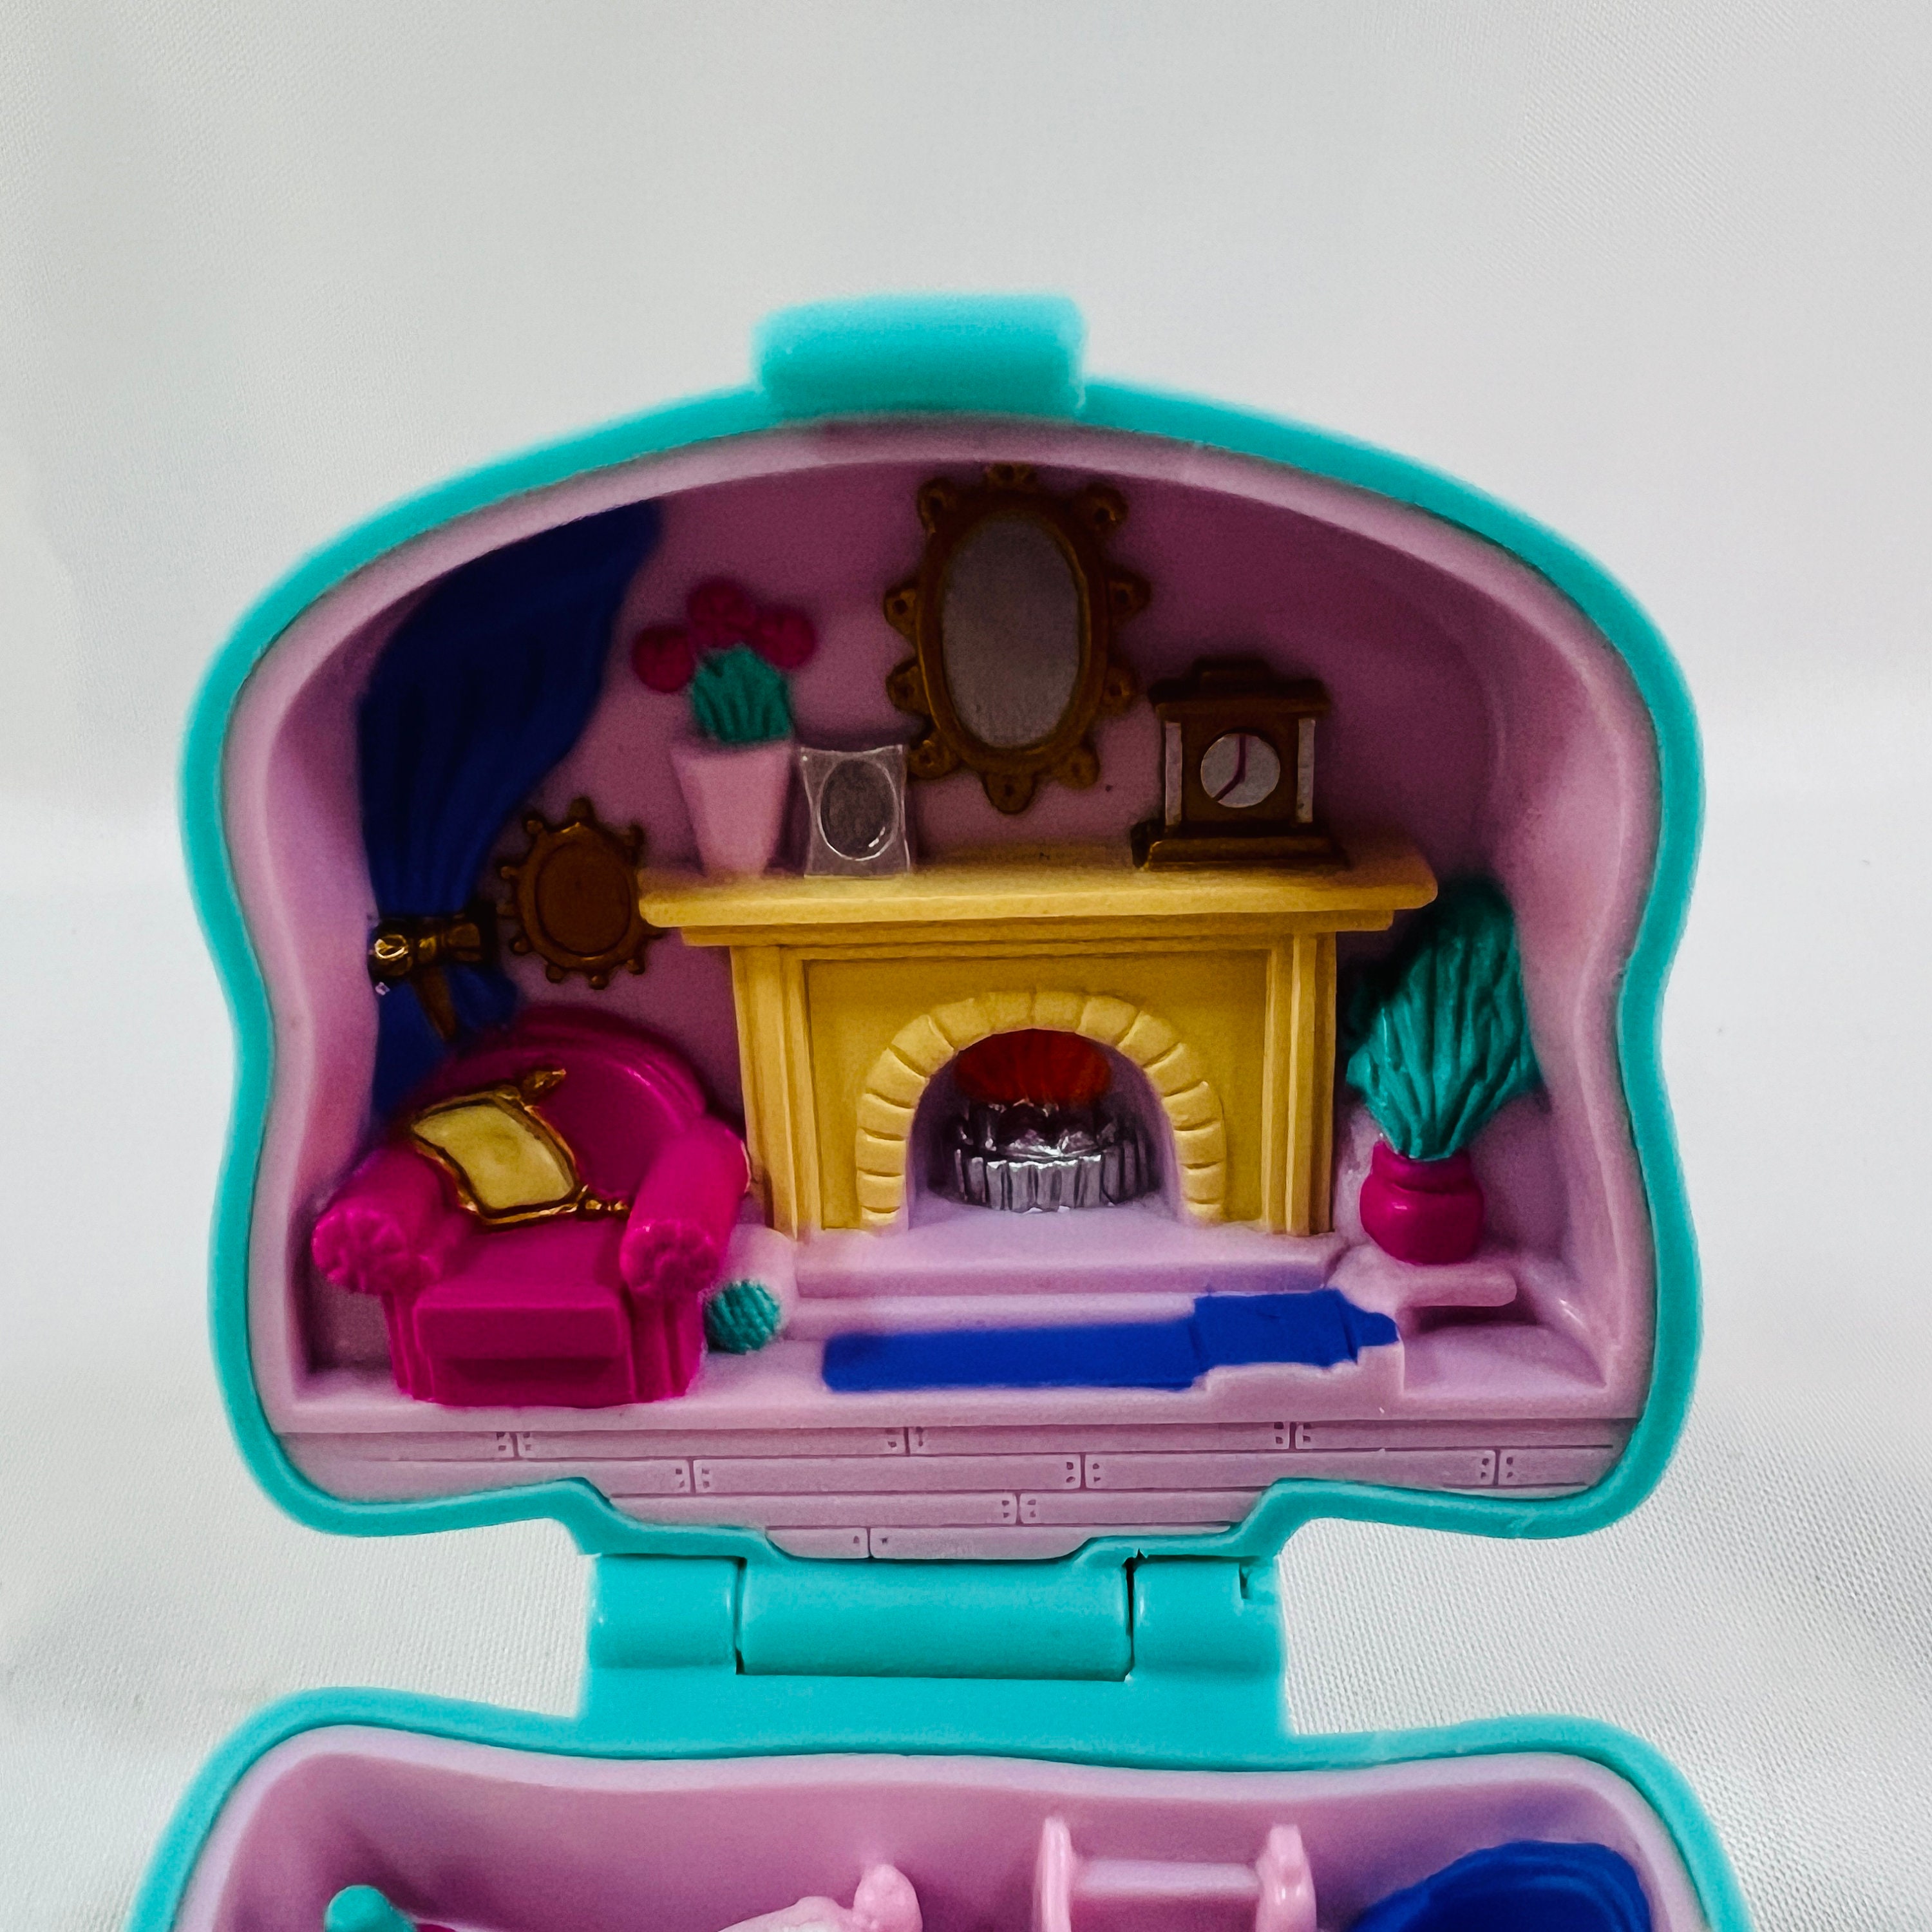 Polly Pocket Bluebird 1993 Cuddly Kitty Tête Chat personnage